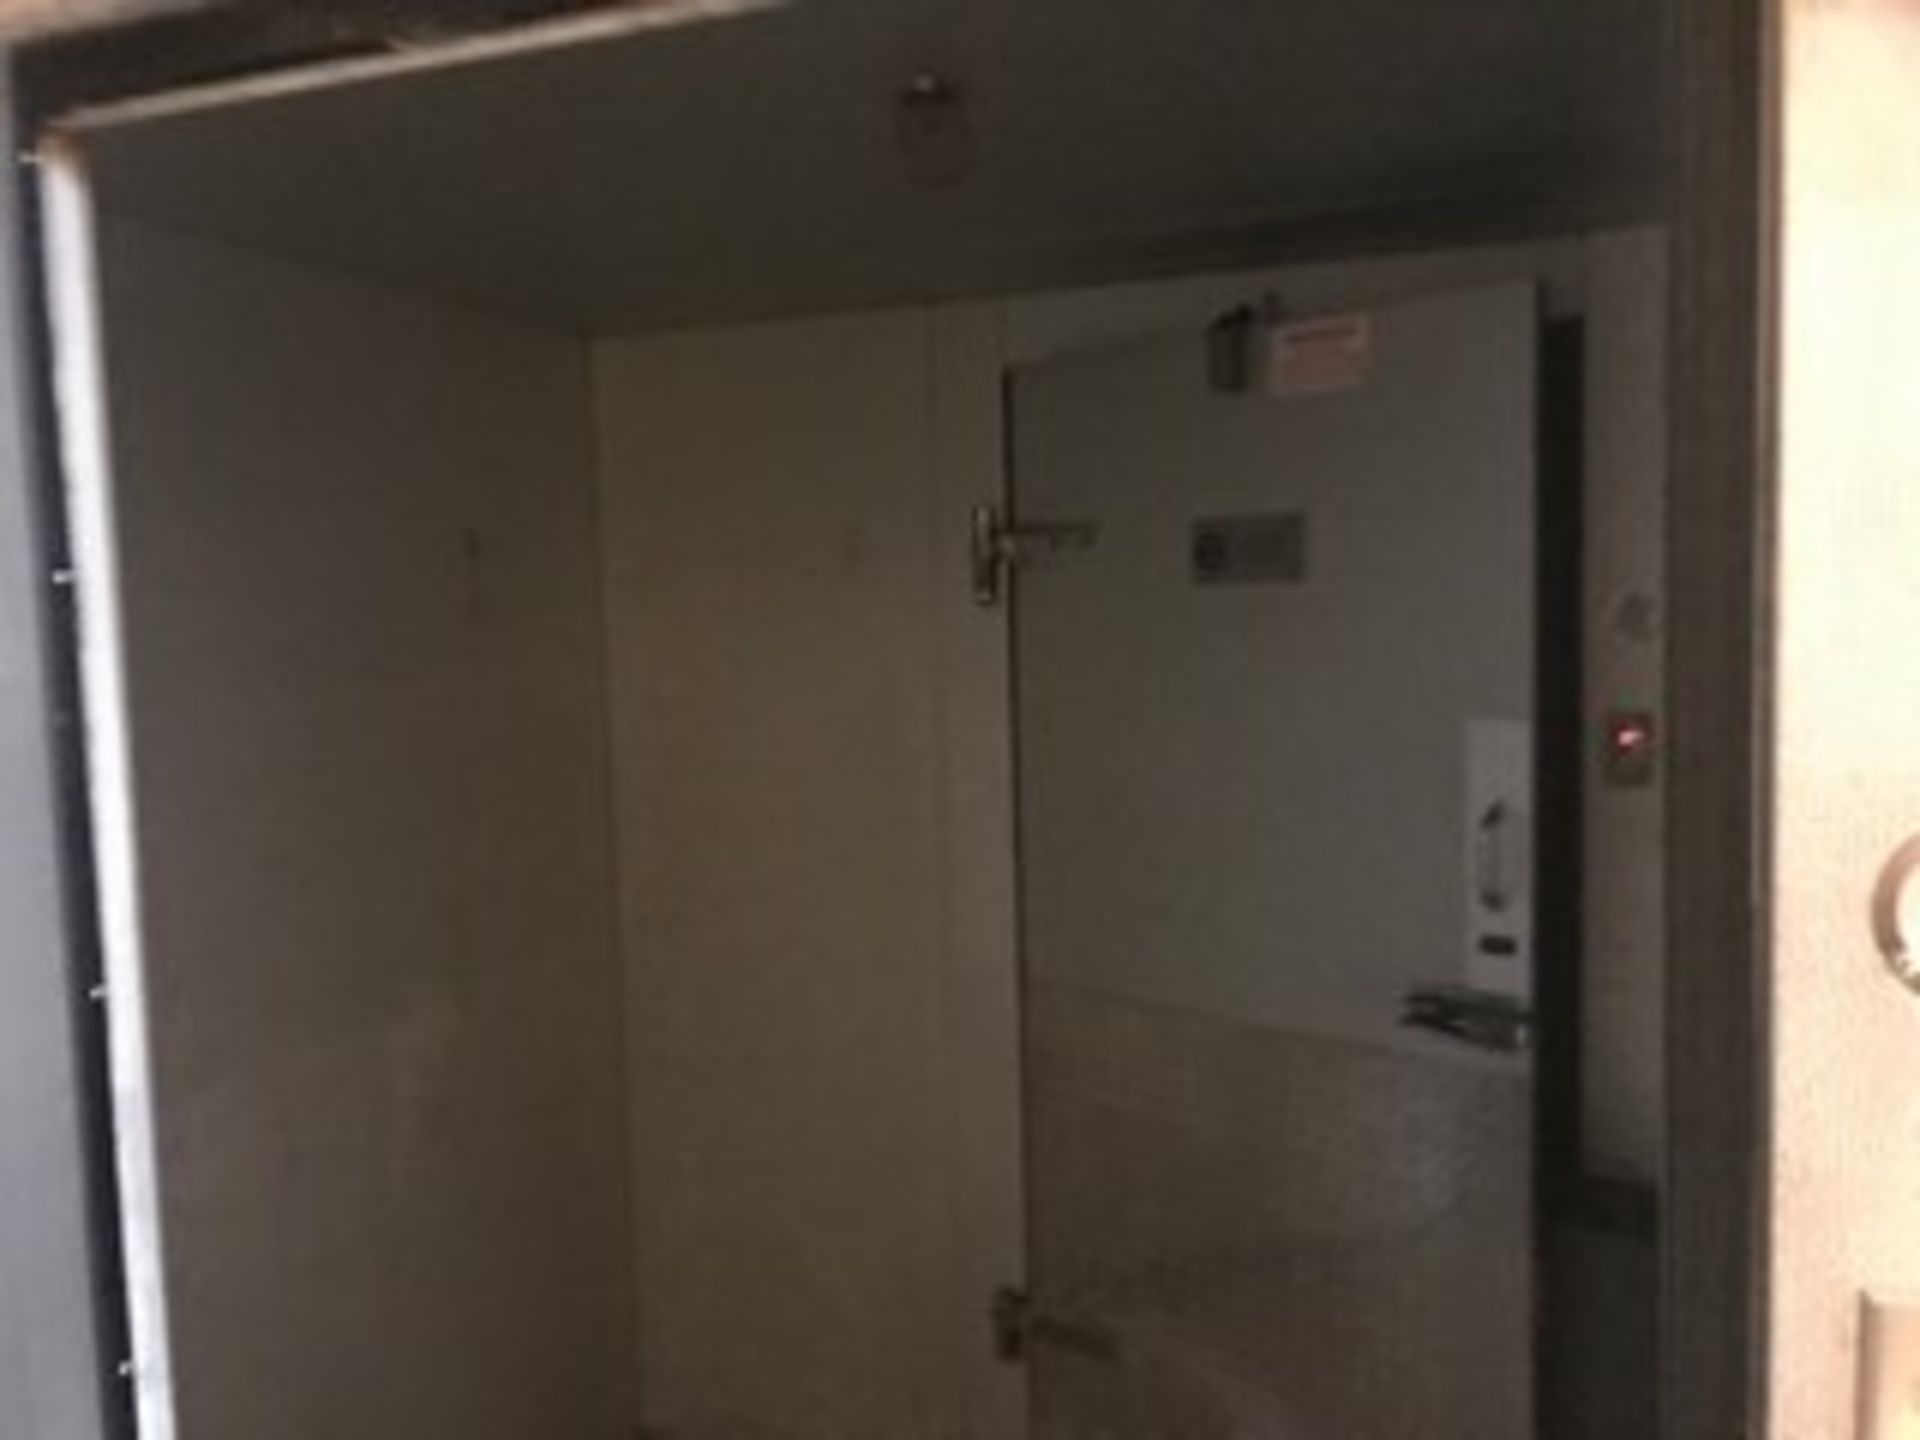 SELF CONTAINED WALK-IN COOLER / FREEZER COMBO - Image 2 of 4